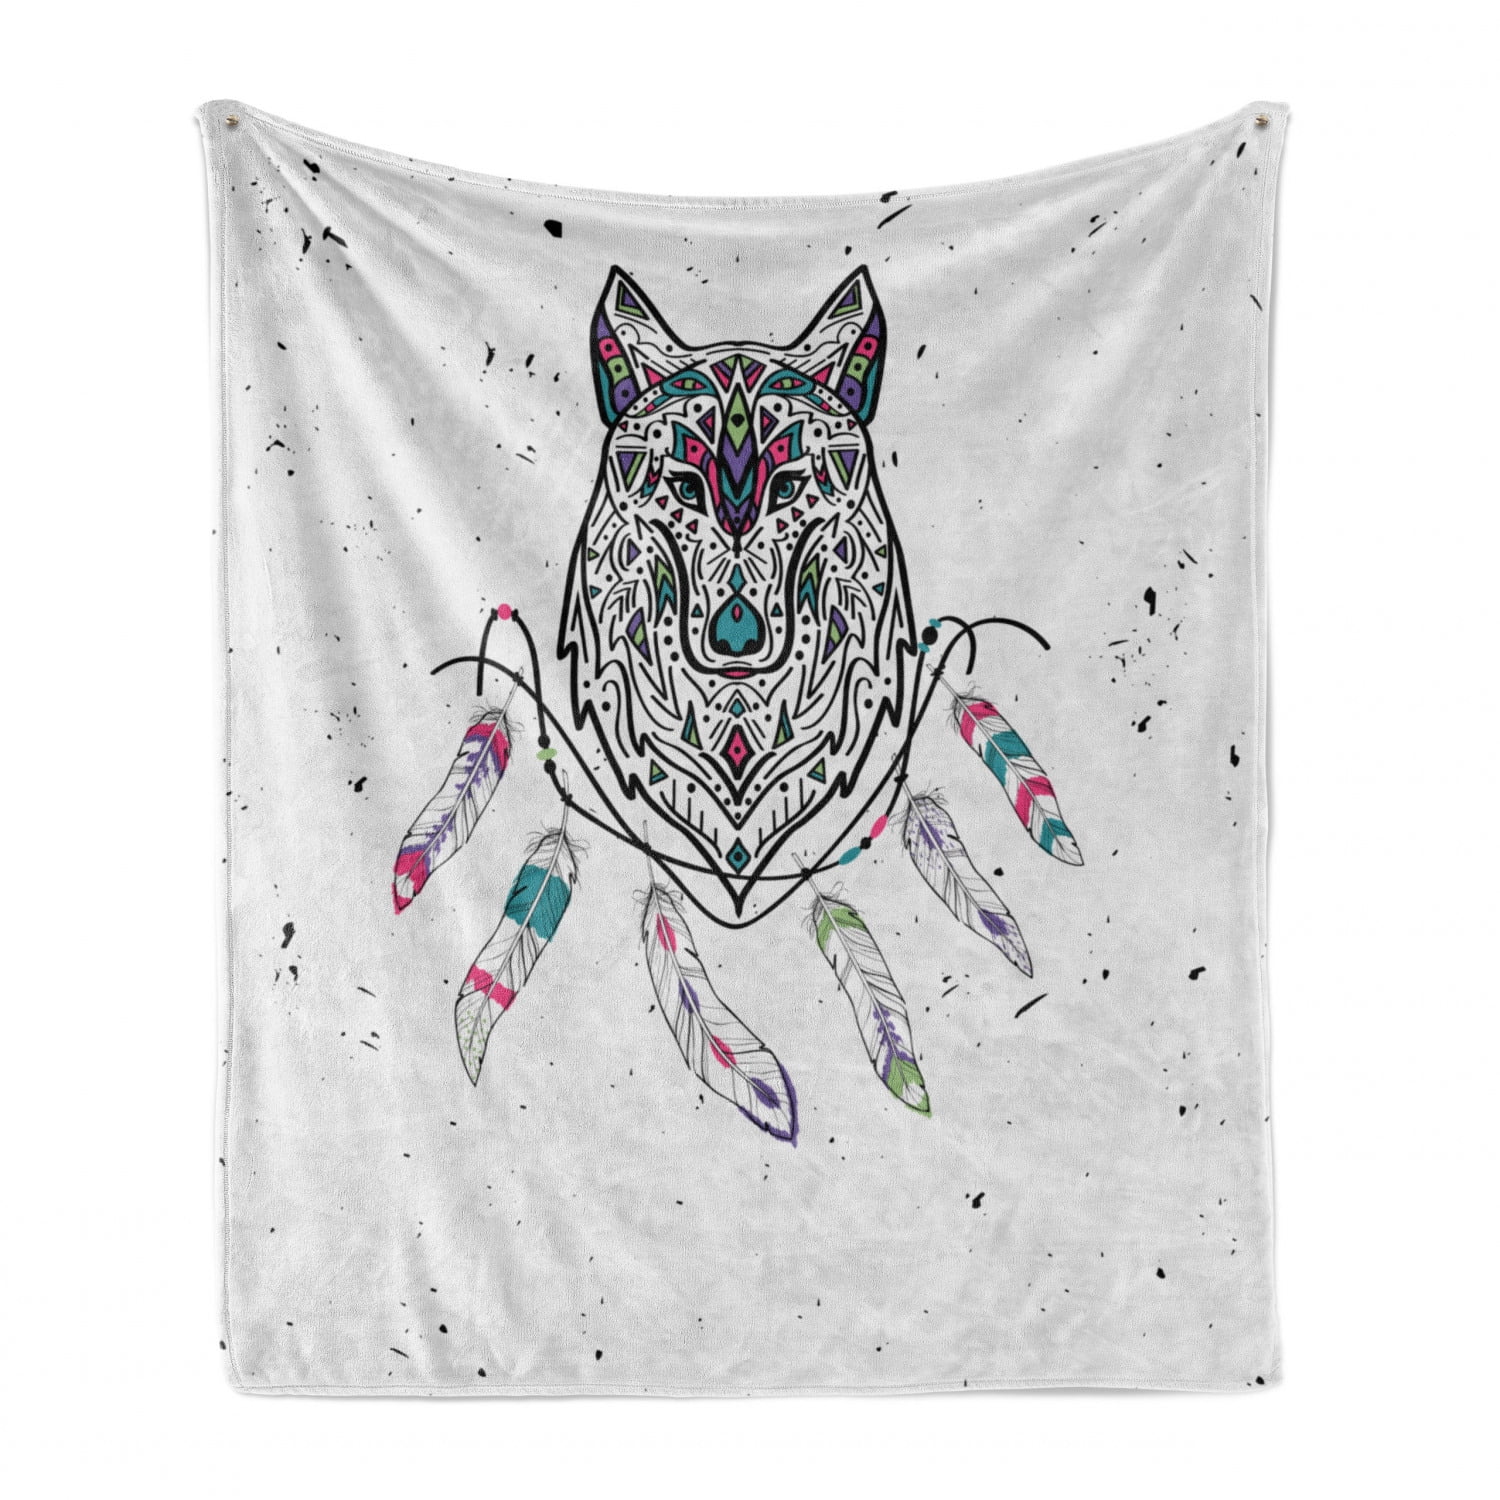 Hand Drawn Be Wild and Wonder Words Howling Wolf in The Woods Under Moon Ambesonne Adventure Soft Flannel Fleece Throw Blanket 50 x 60 Cozy Plush for Indoor and Outdoor Use Night Blue White 